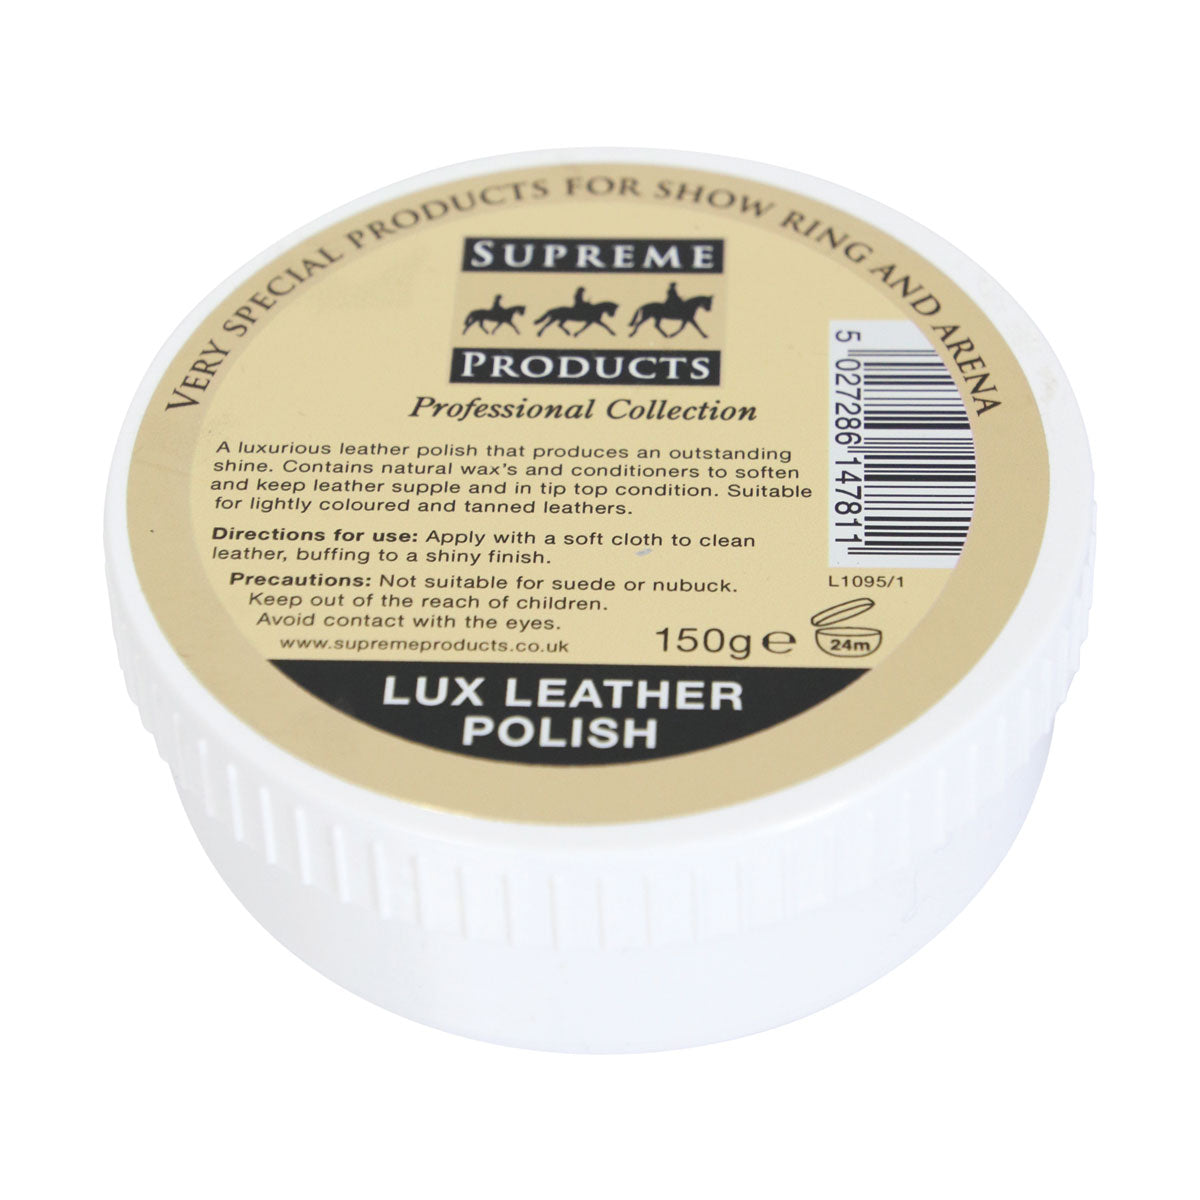 Supreme Products Lux Leather Polish